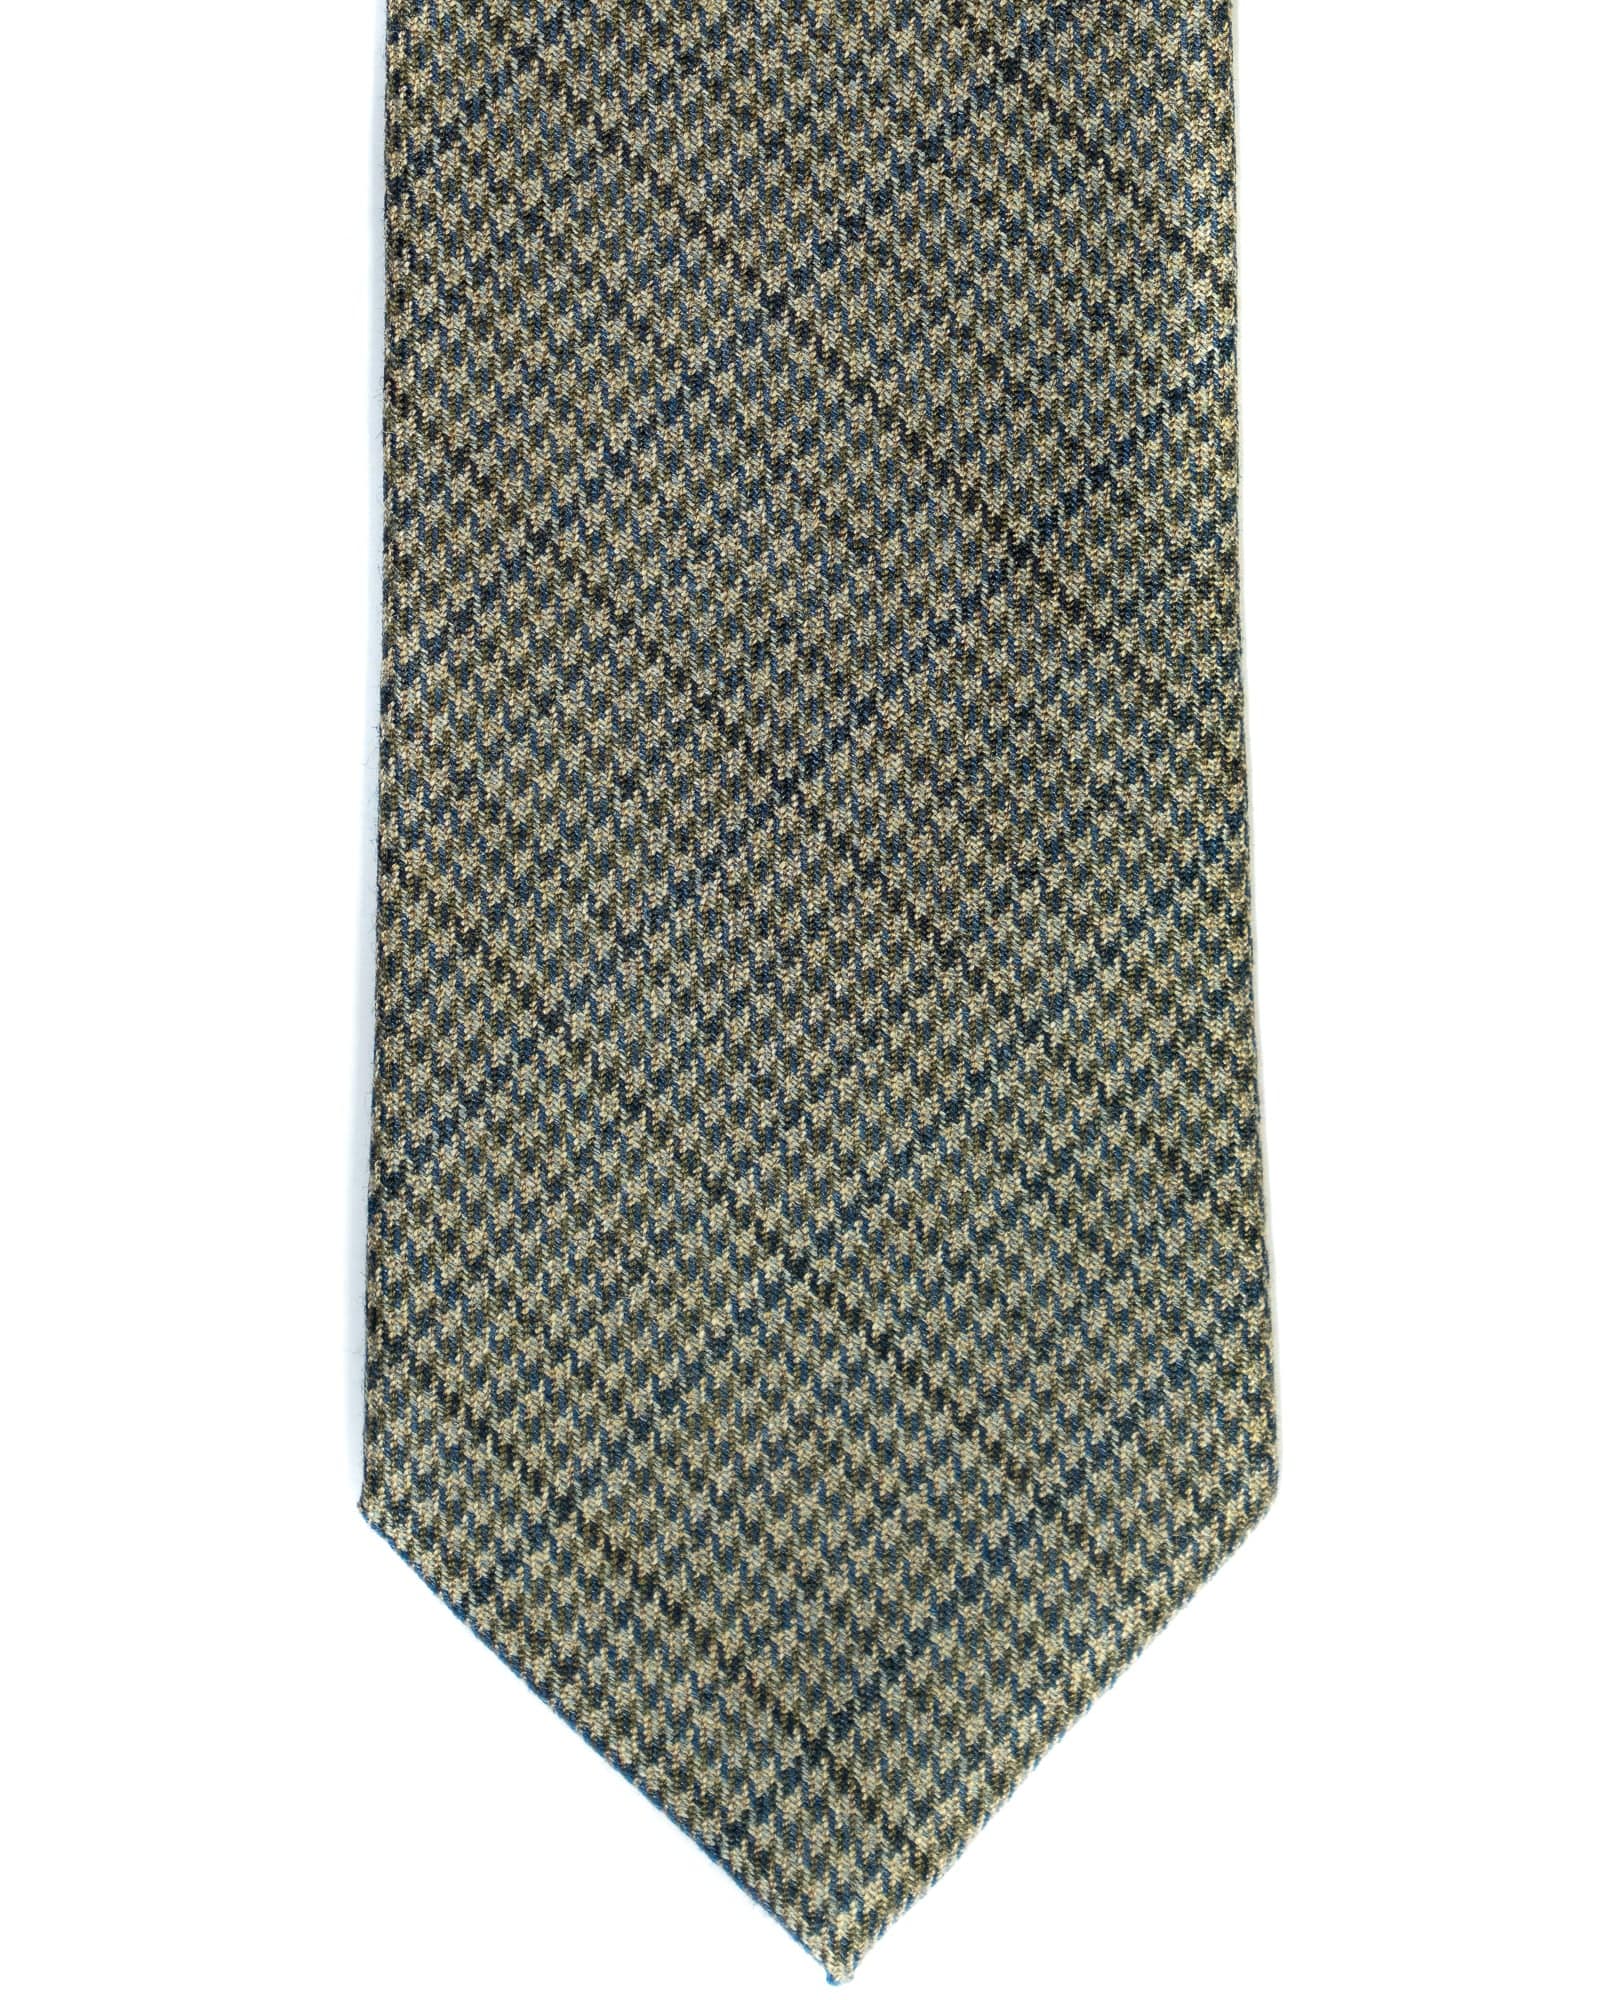 Silk And Wool Tie In Camel And Grey Houndstooth Check - Rainwater's Men's Clothing and Tuxedo Rental